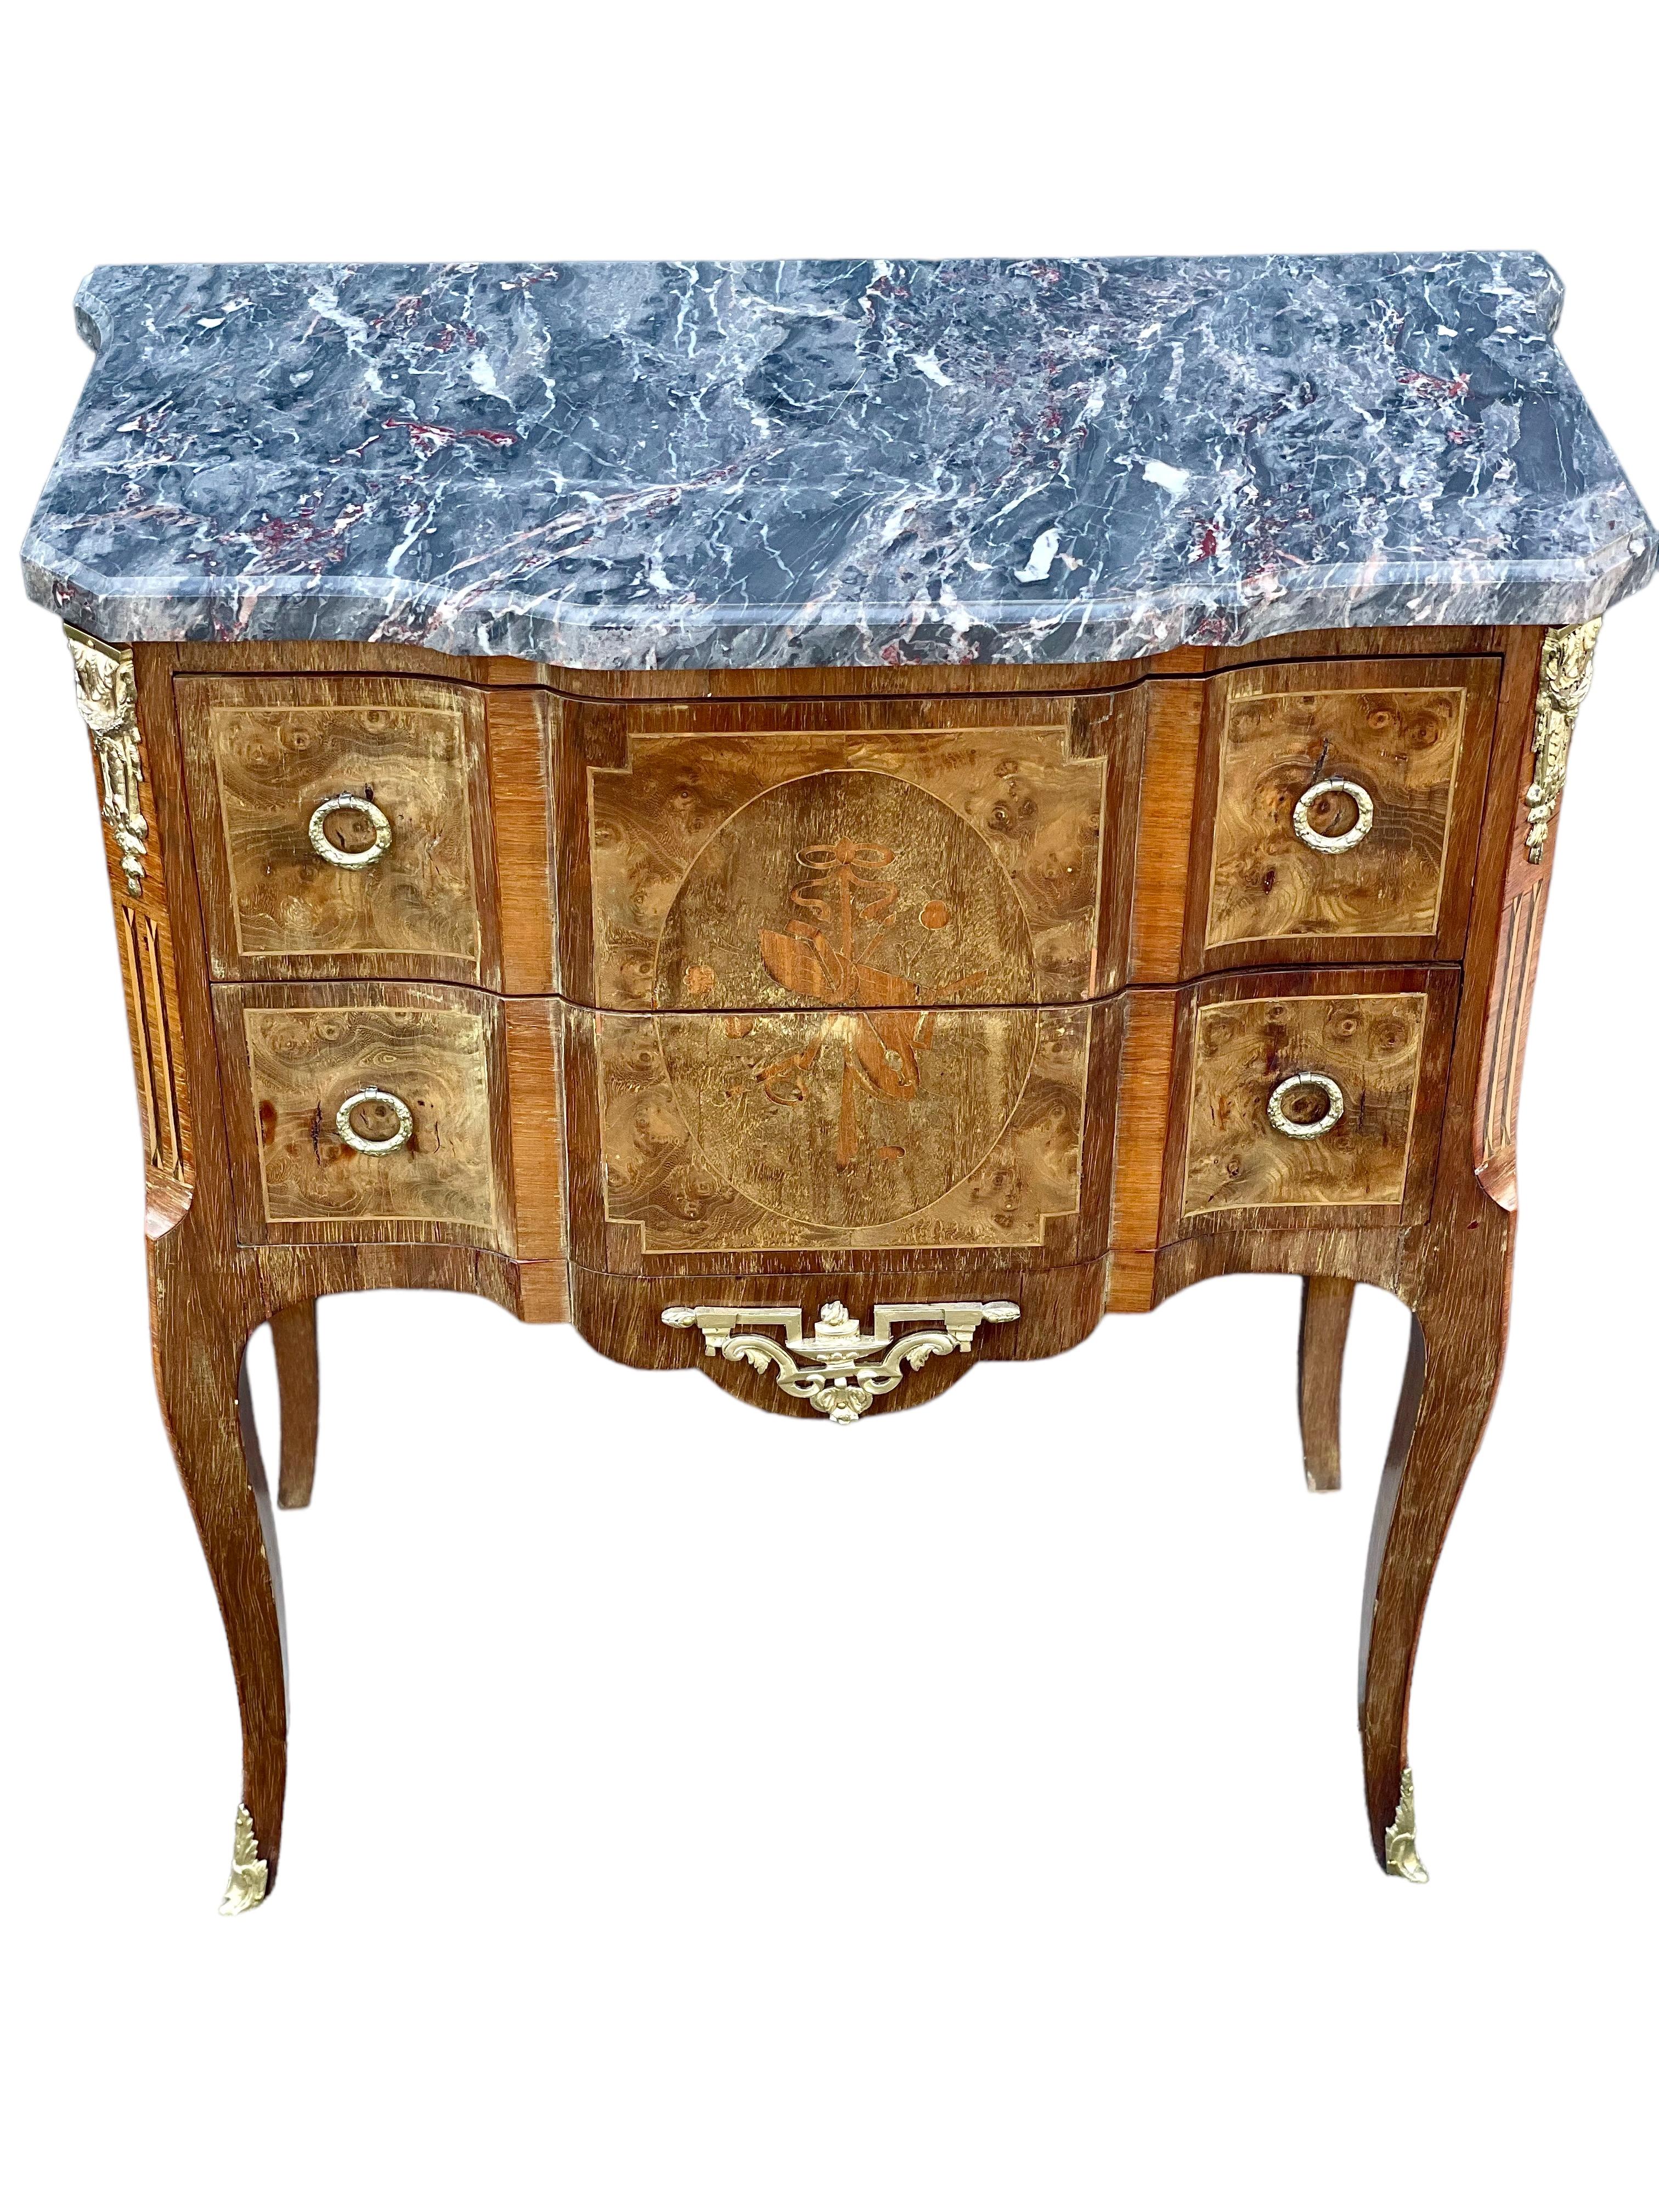 19th Century French Transitional Commodes with Marble Tops For Sale 1